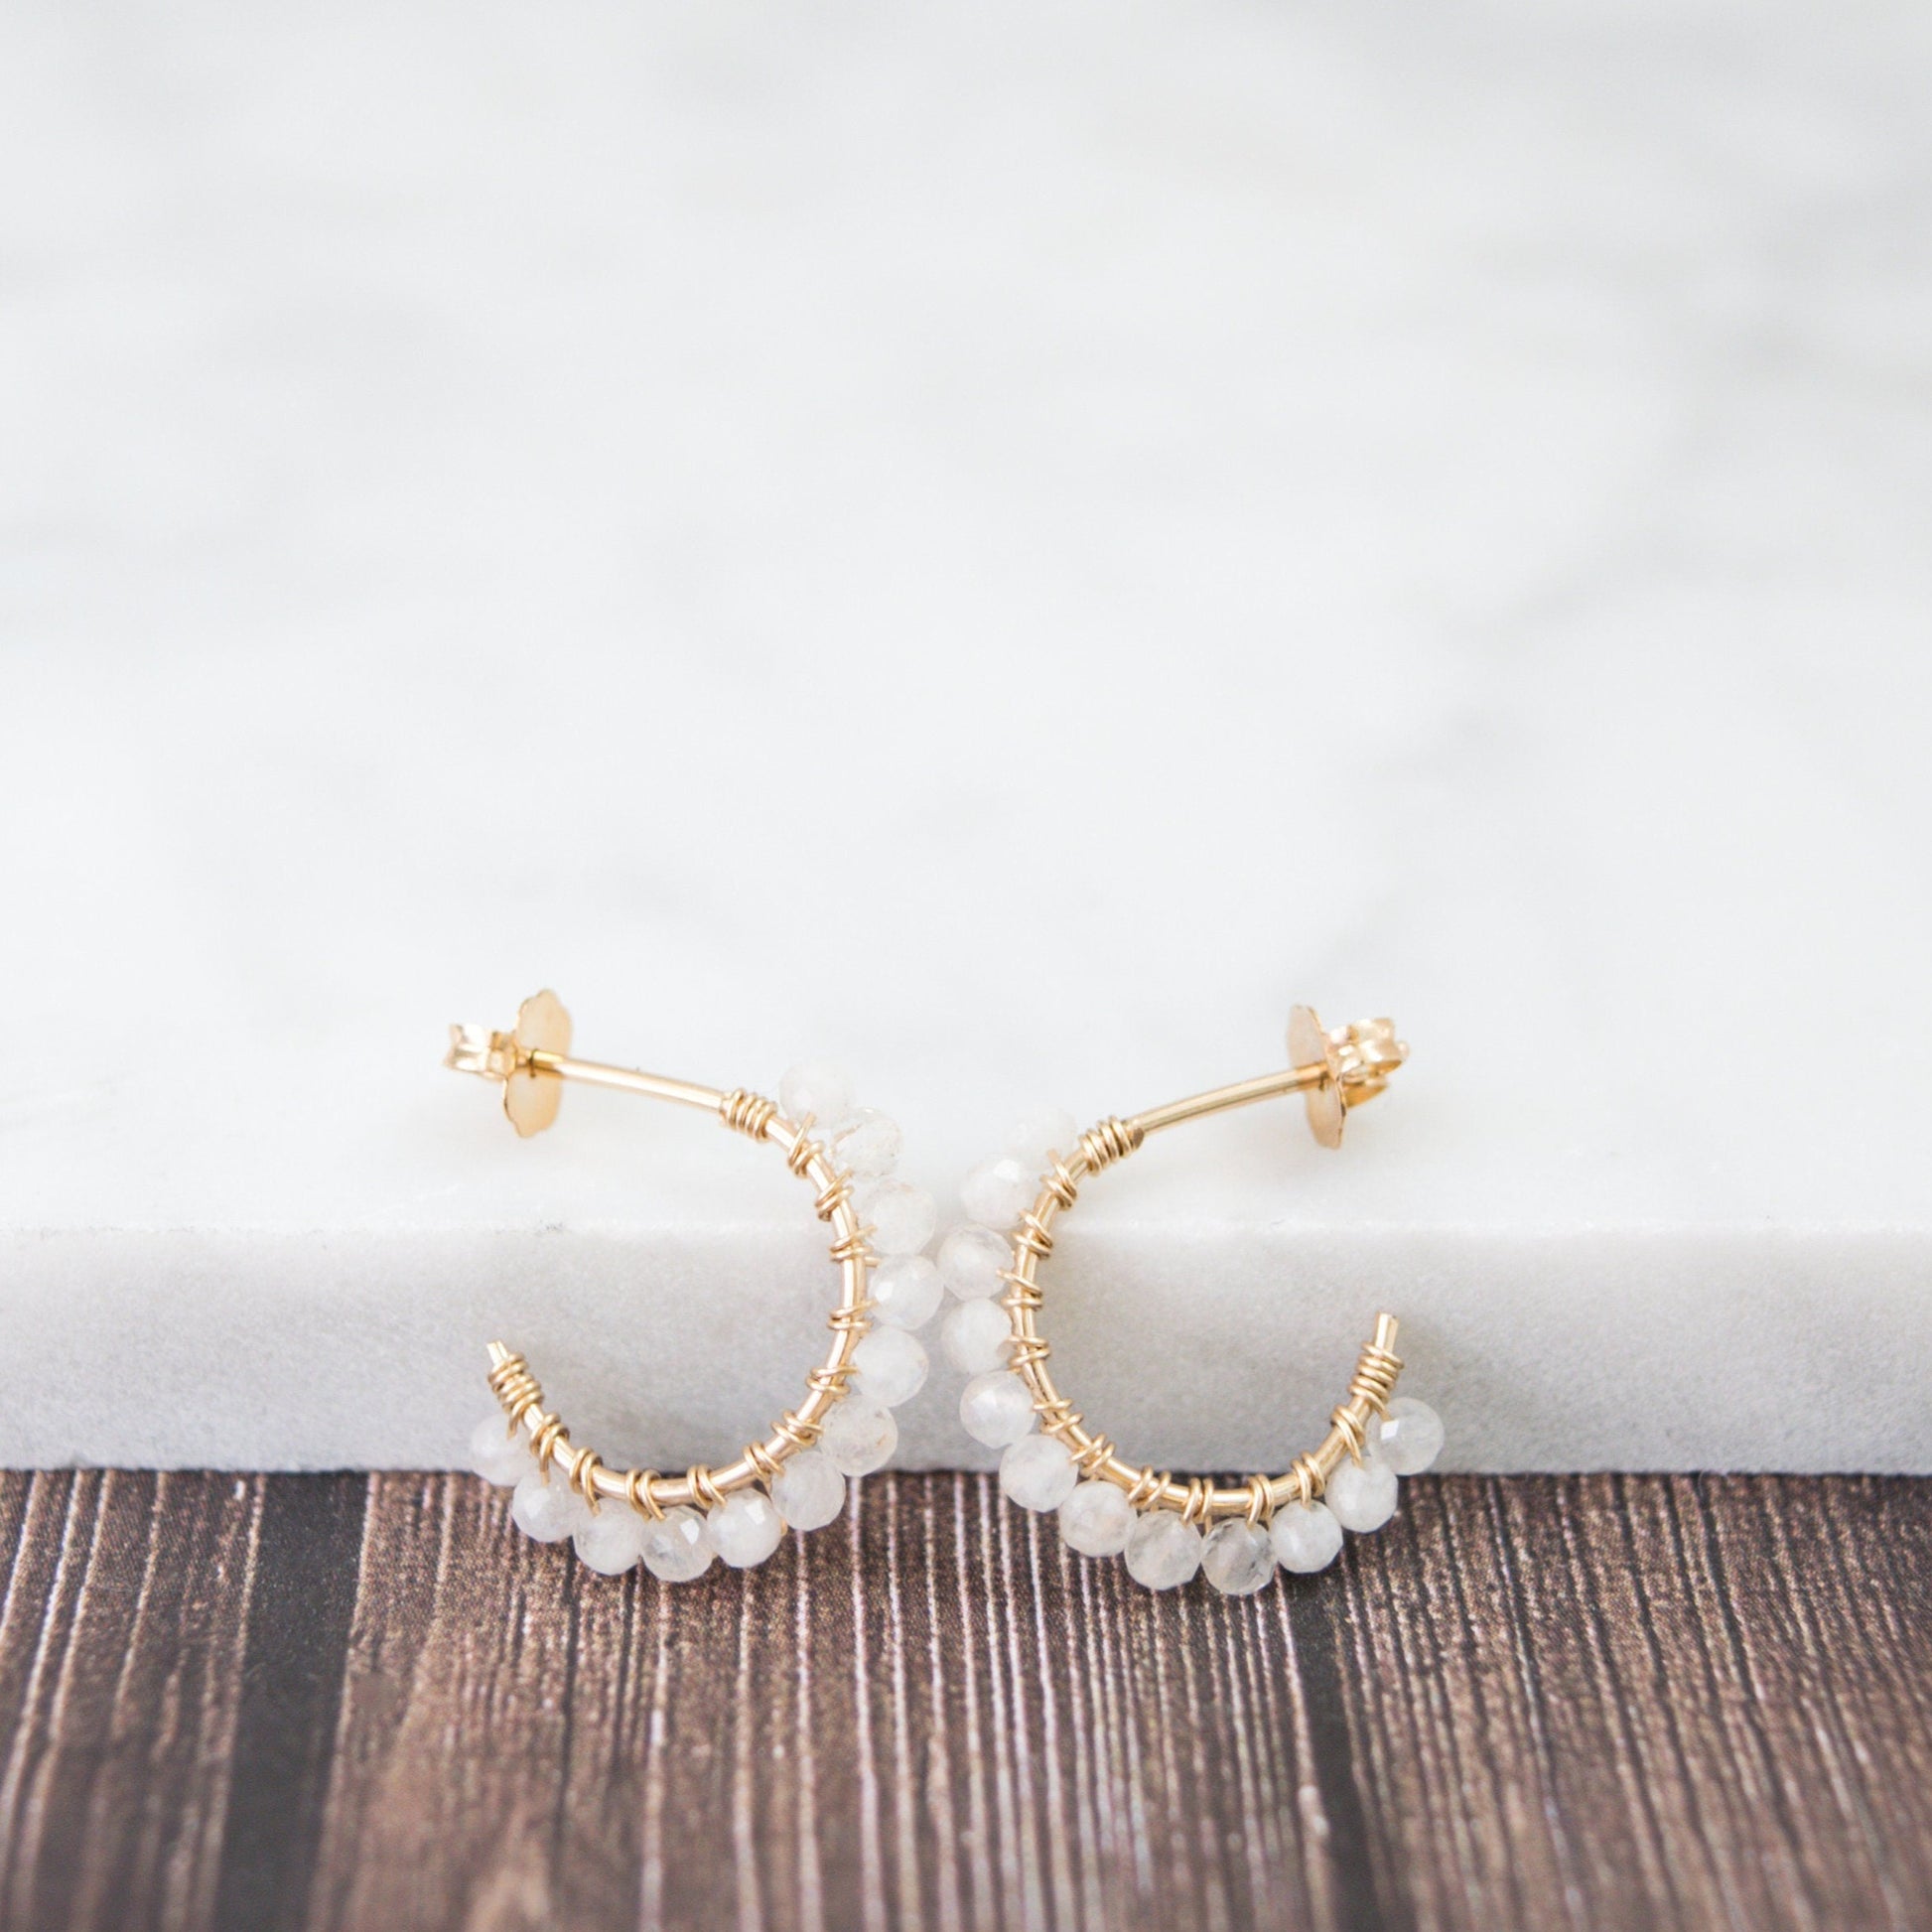 Hand-formed 14k gold-filled wire gracefully shaped into mini rounded hoops. Delicately strung with micro-faceted natural rainbow moonstone beads, these mini hoops add a polished finish to any outfit.